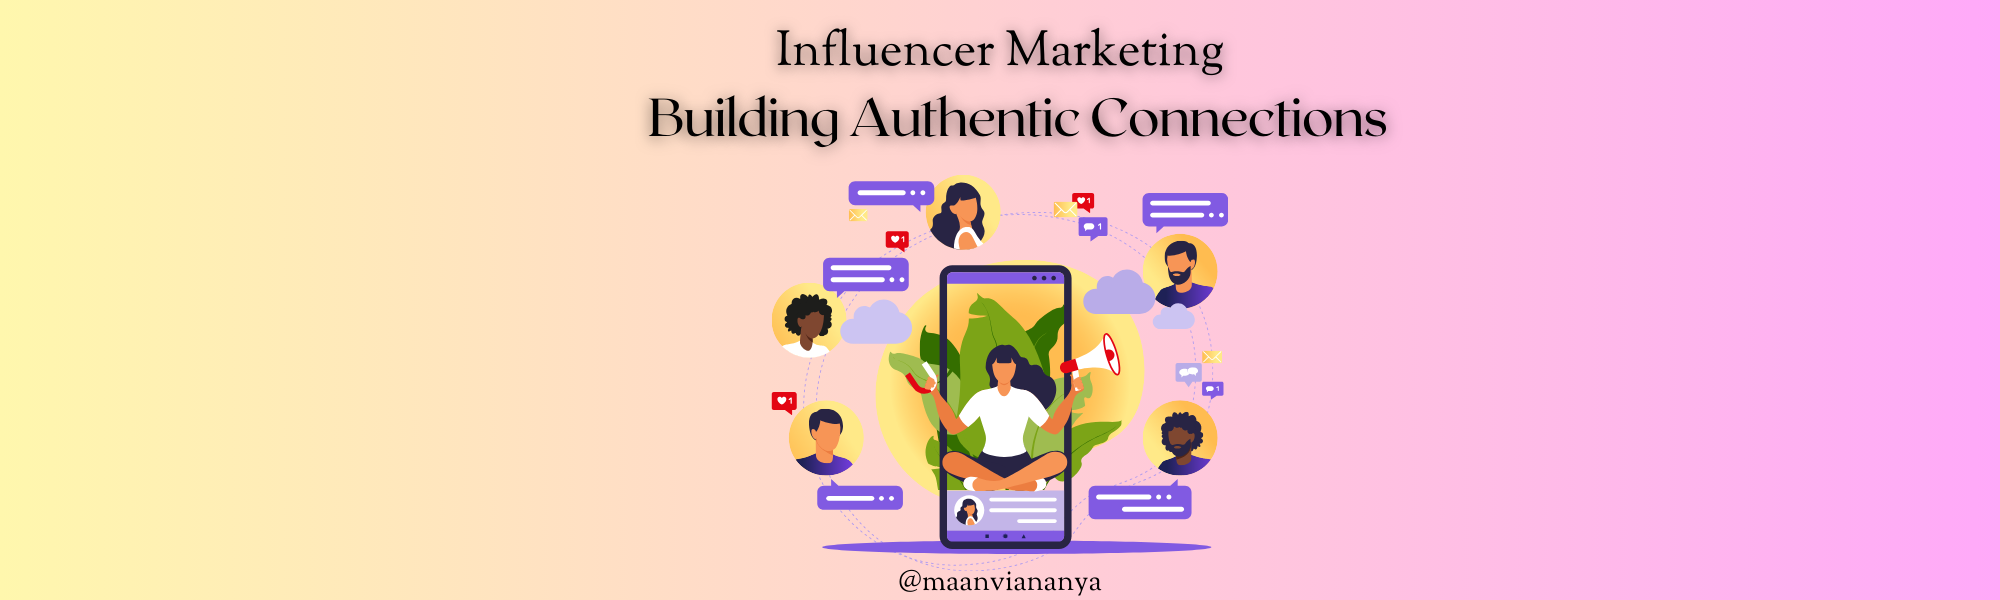 Influencer Marketing: Building Authentic Connections